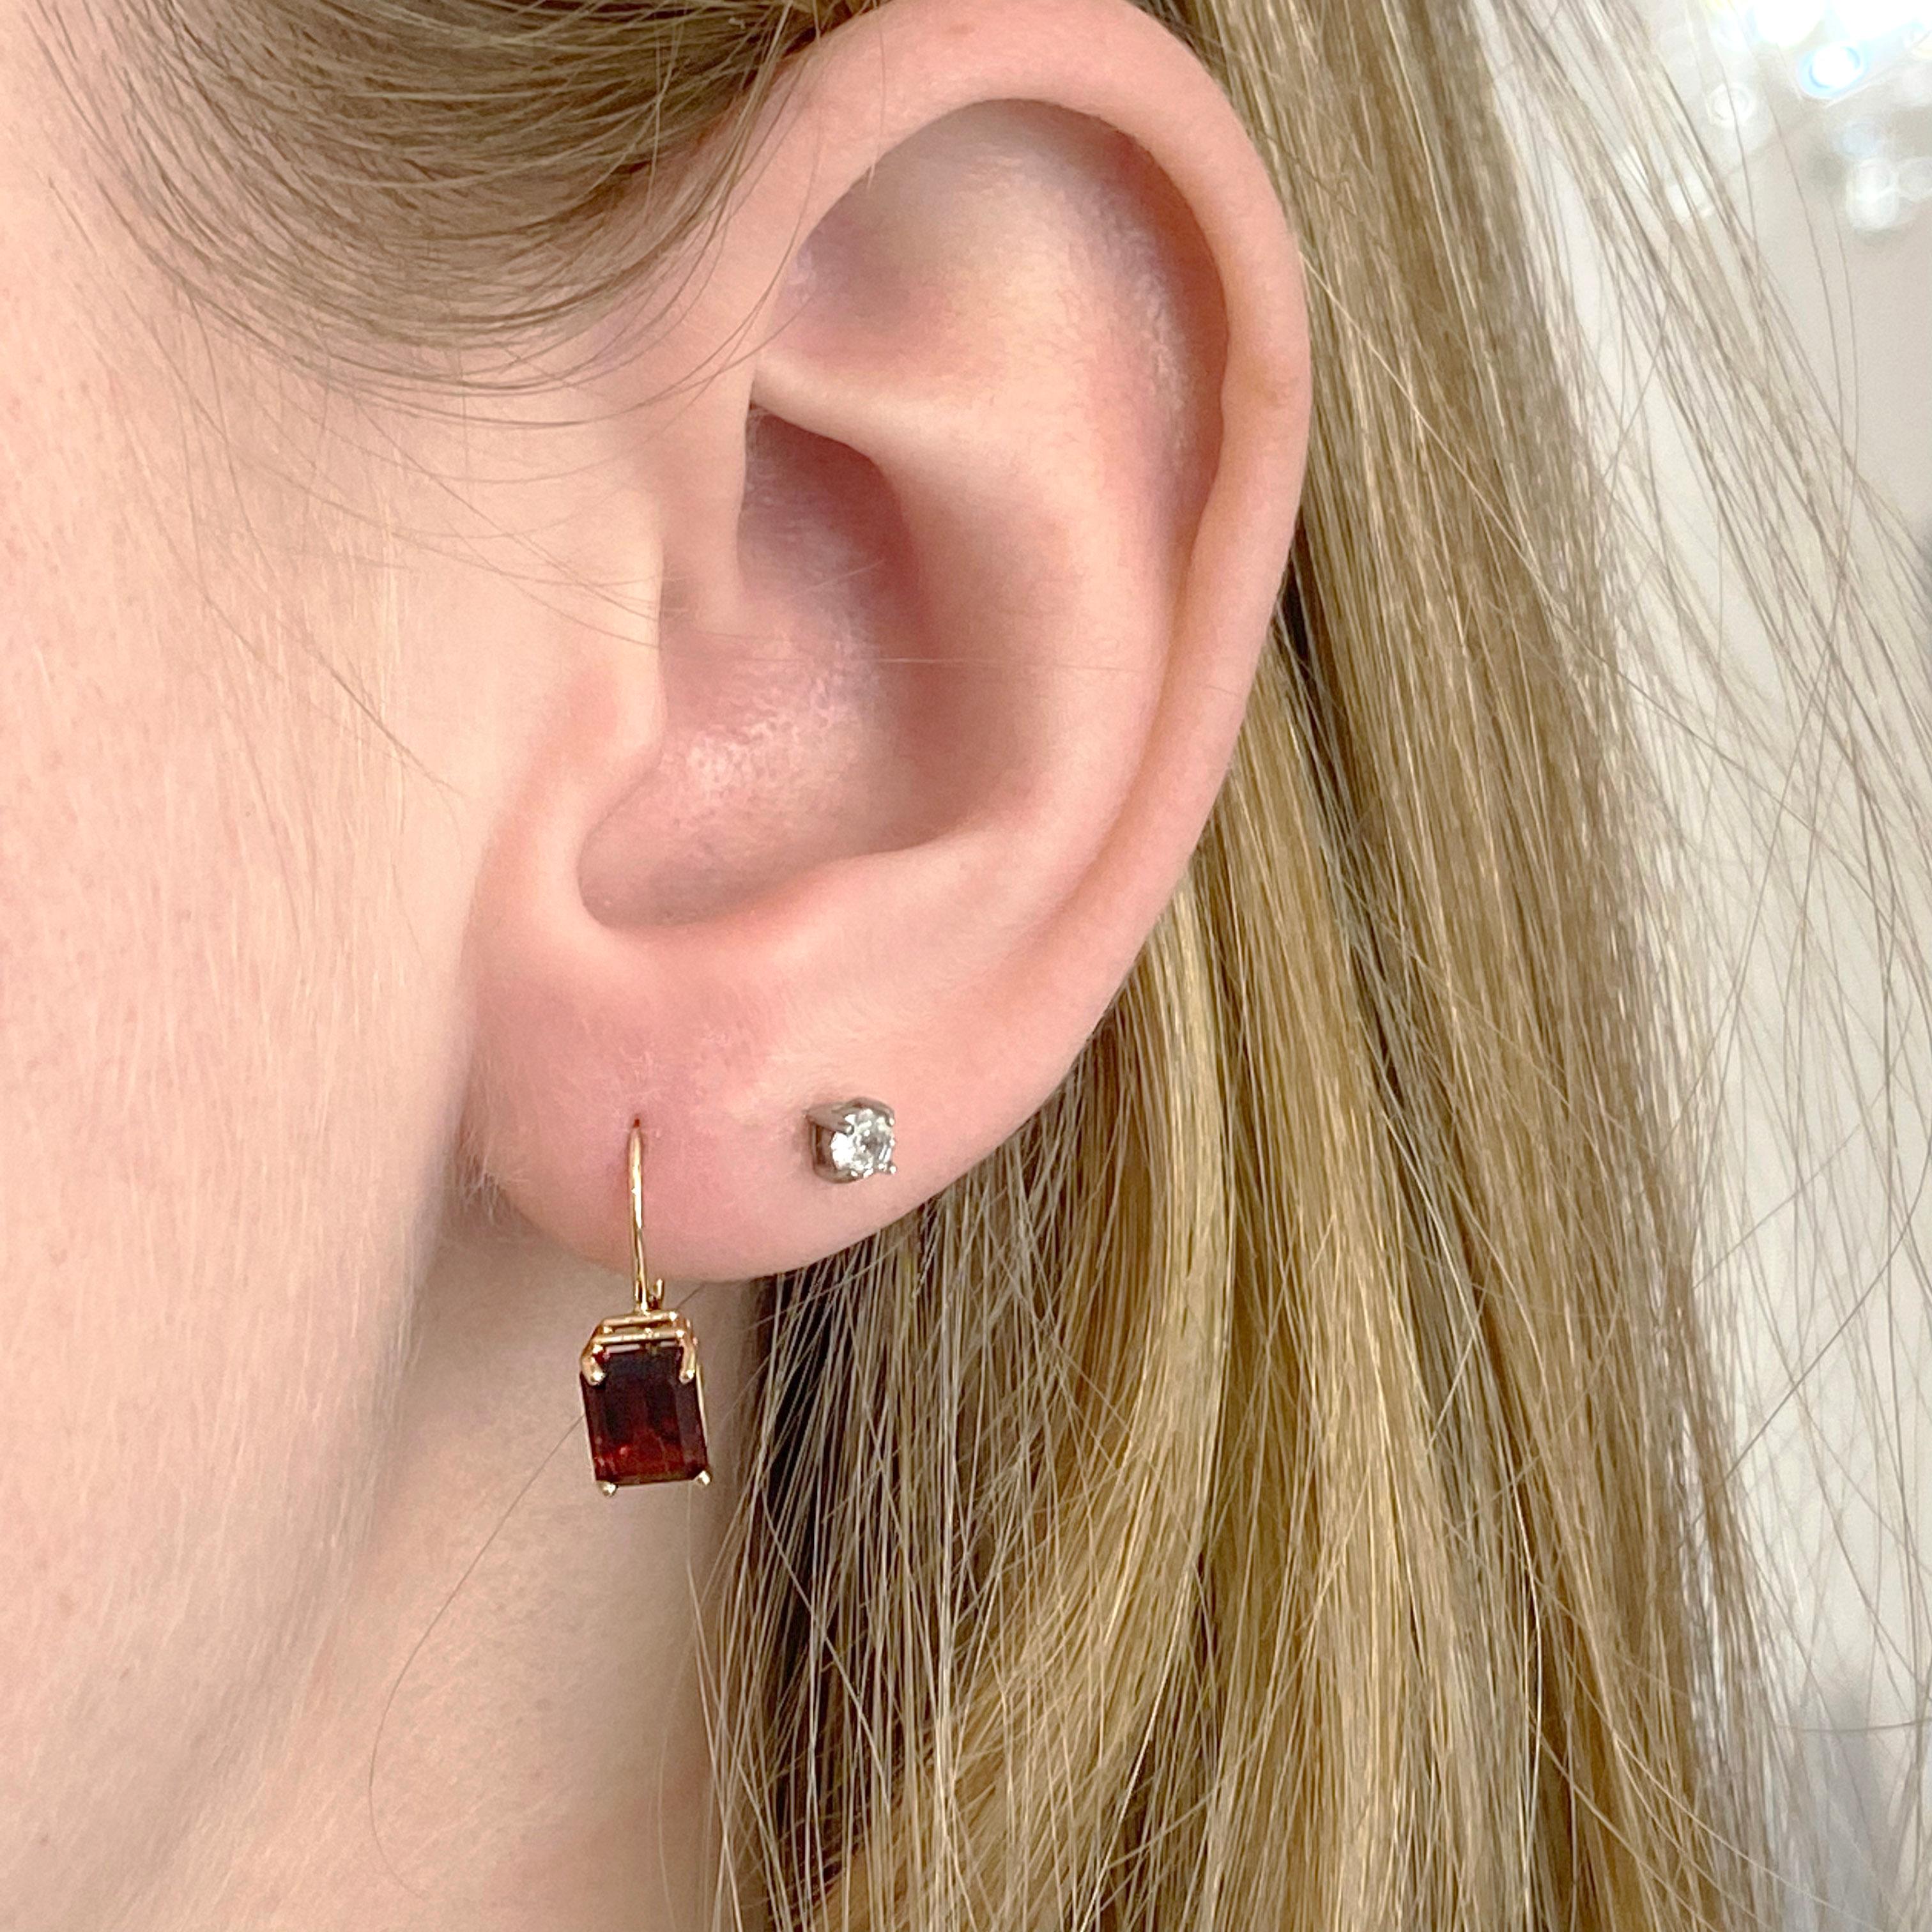 The garnet earrings are emerald cut and set in a glorious leverback settings. The garnets are genuine and approximate .50 carats each. These earrings are lovely with the garnet hanging right below the earlobe.
1 Set
Metal Quality: 14 Karat Yellow